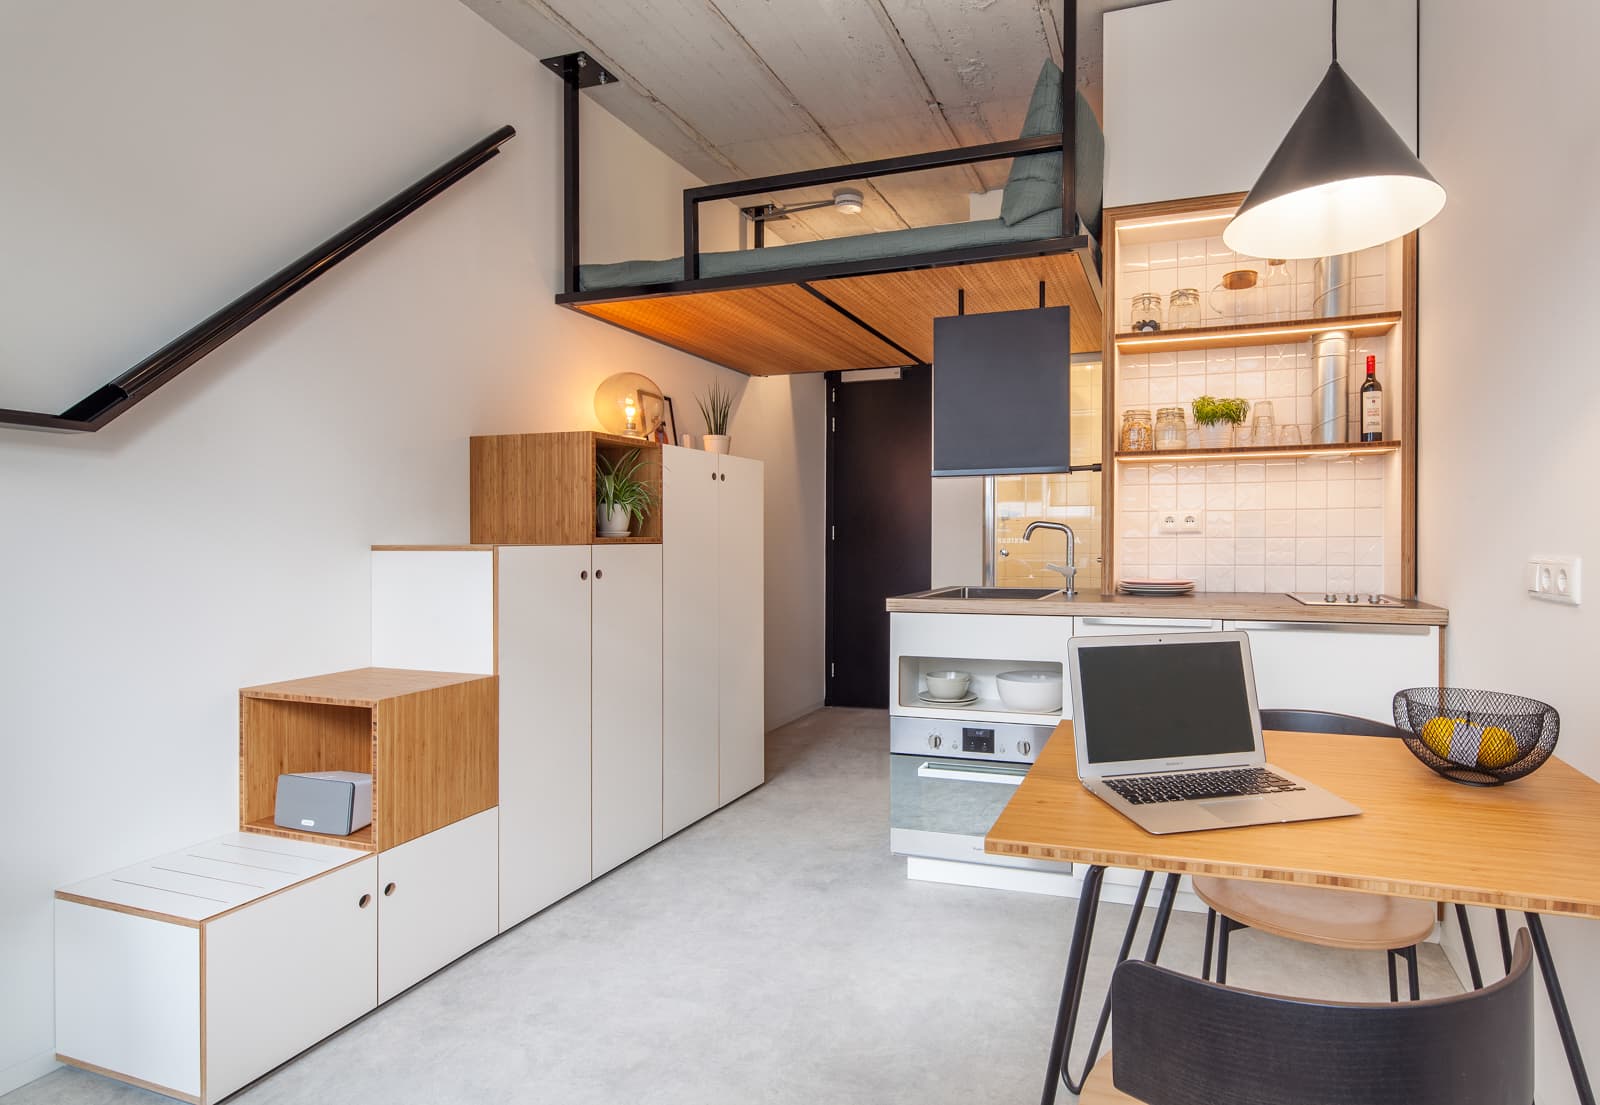 These 200 Square Foot Tiny House-Inspired Dorms Will Make You Want to